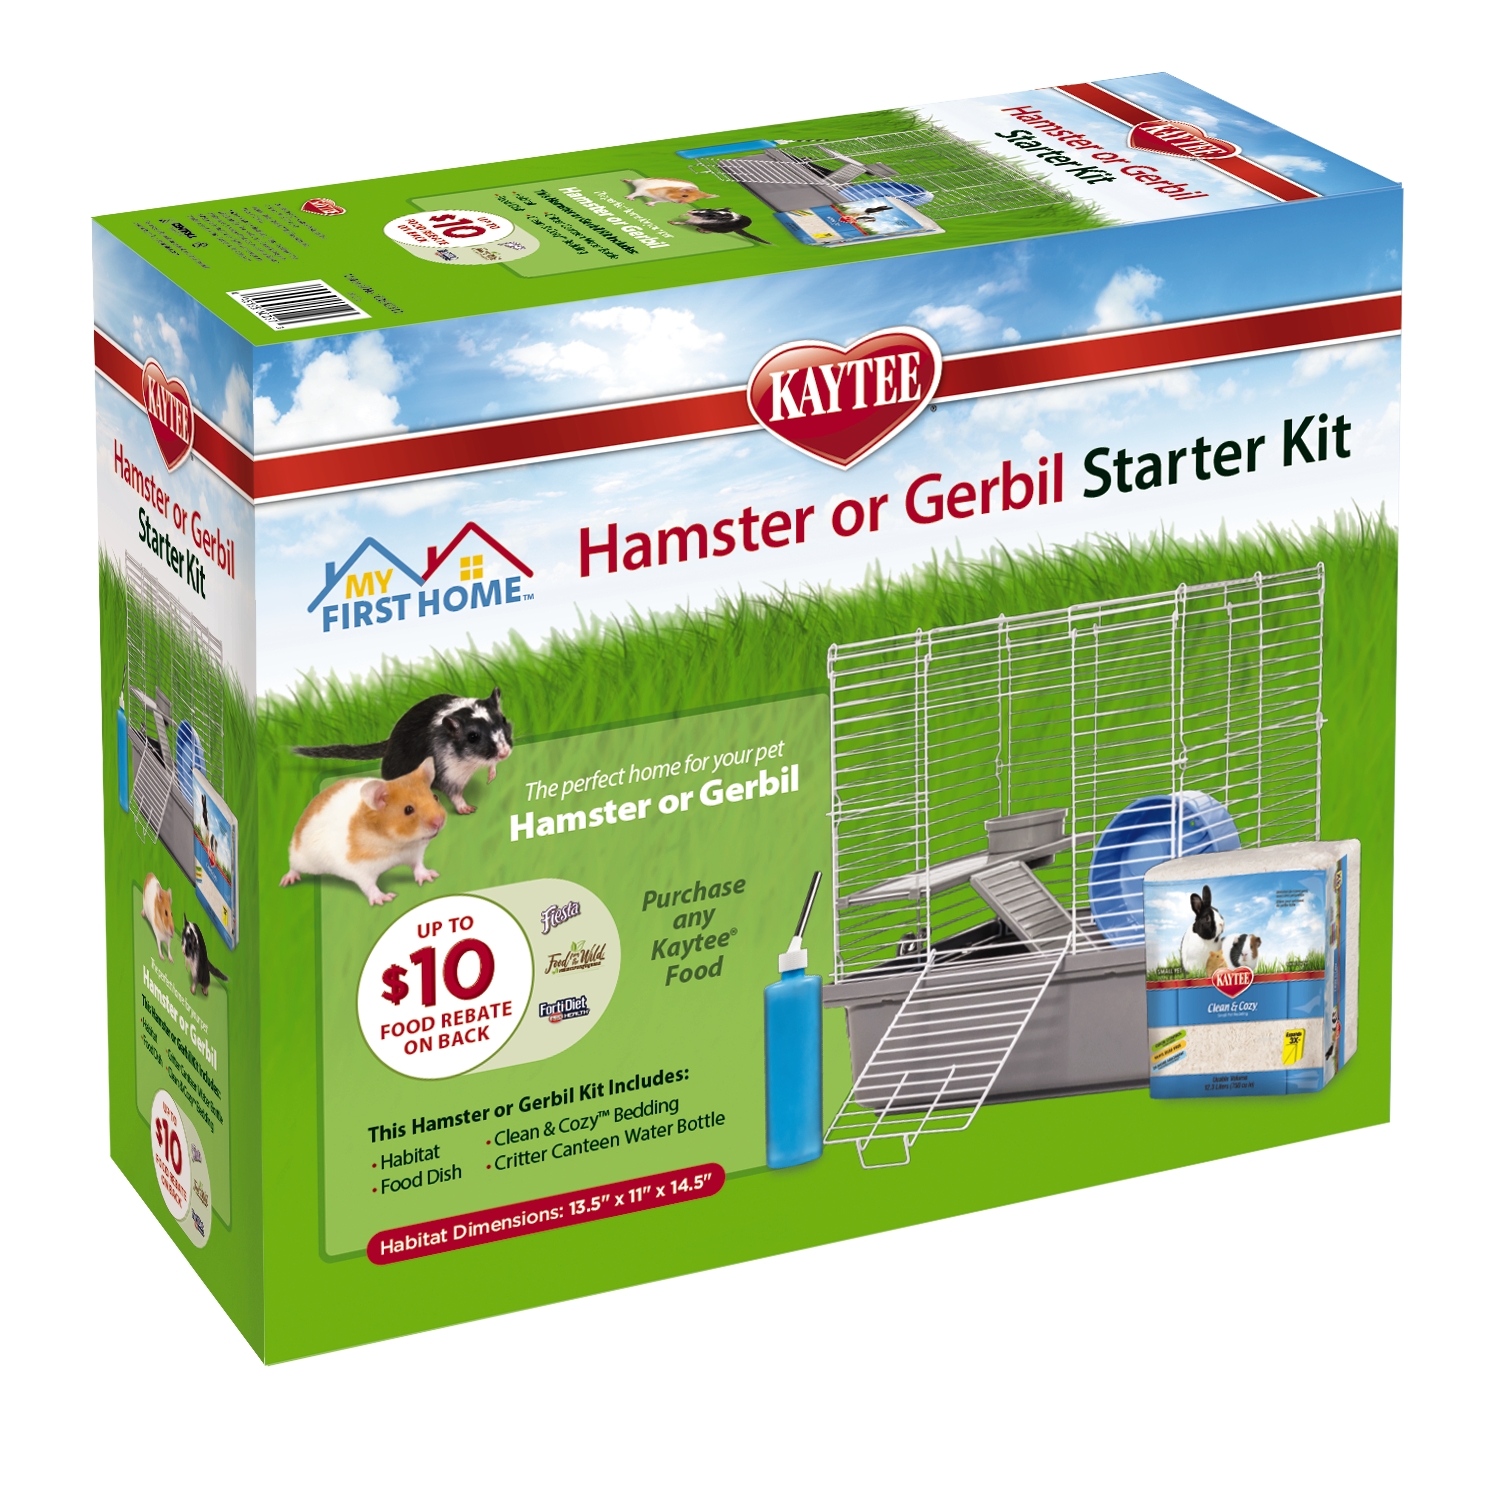 Kaytee My First Home Hamster and Gerbil Starter Kit